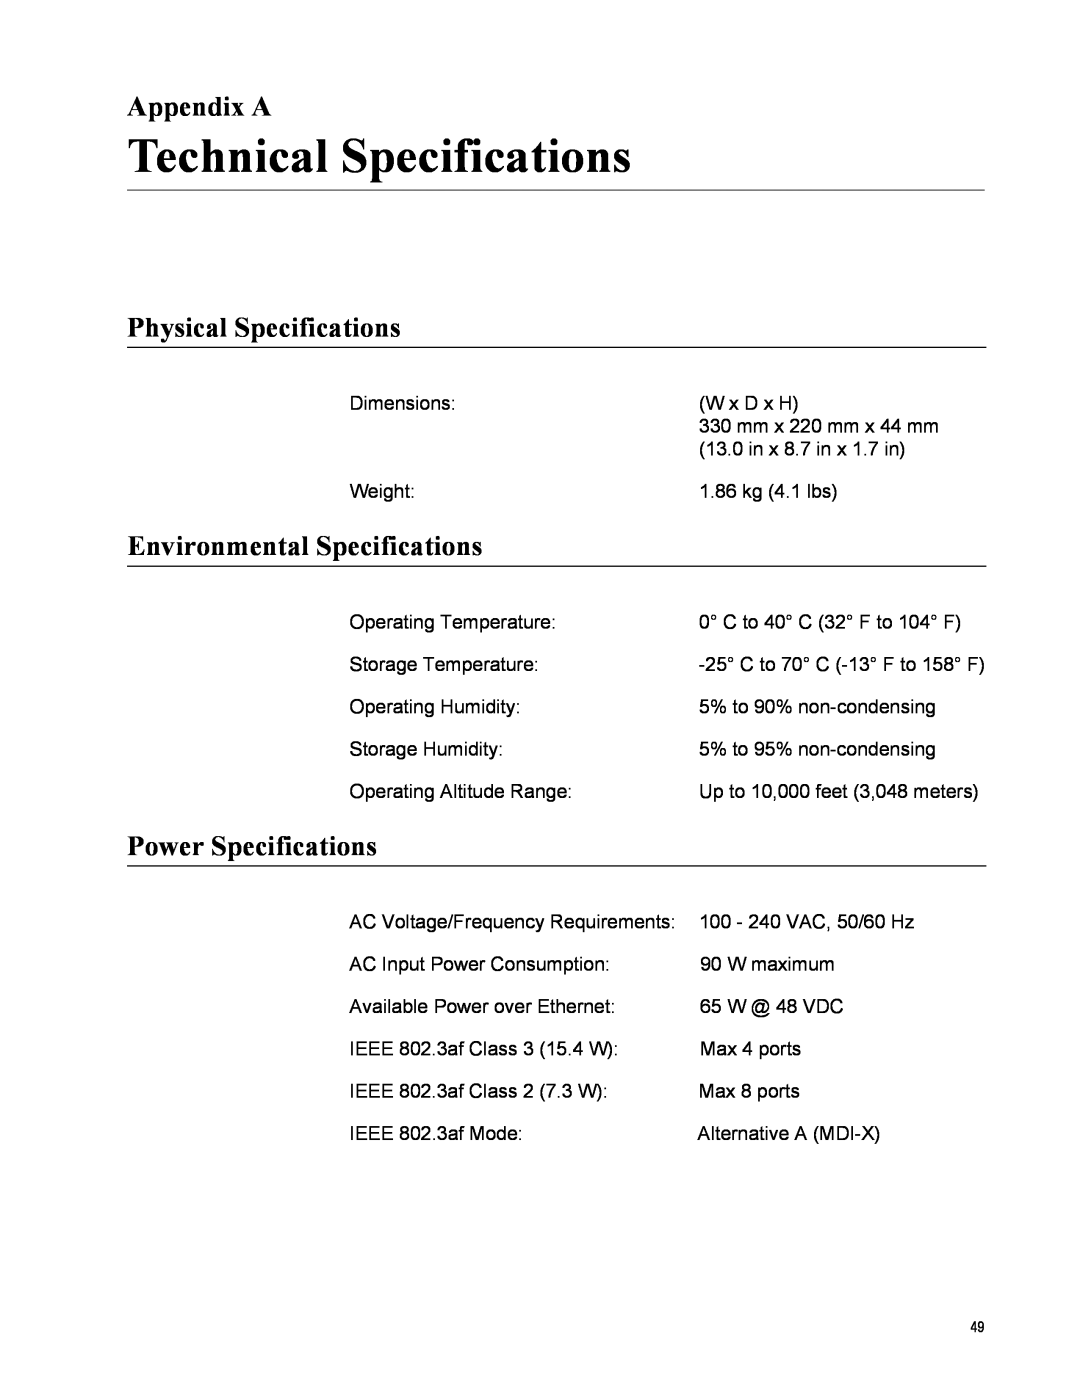 Allied Telesis GS900/8POE Technical Specifications, Appendix A, Physical Specifications, Environmental Specifications 